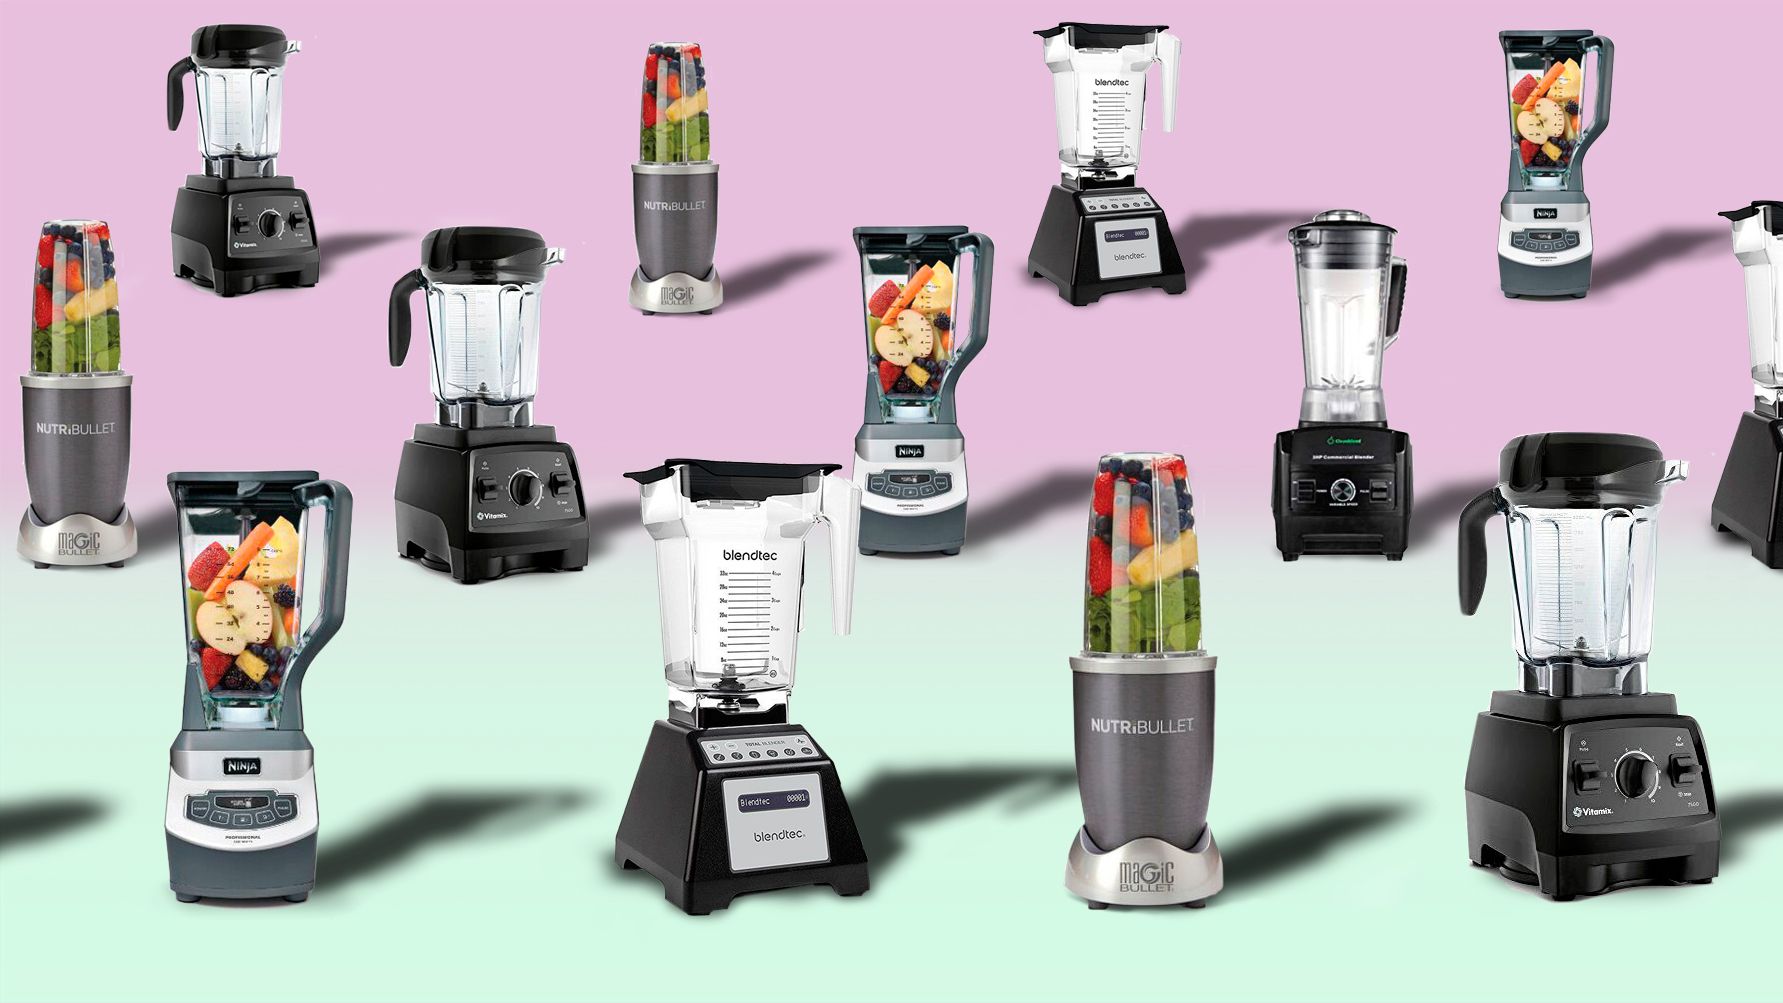 Product, Small appliance, Blender, Kitchen appliance, Home appliance, 